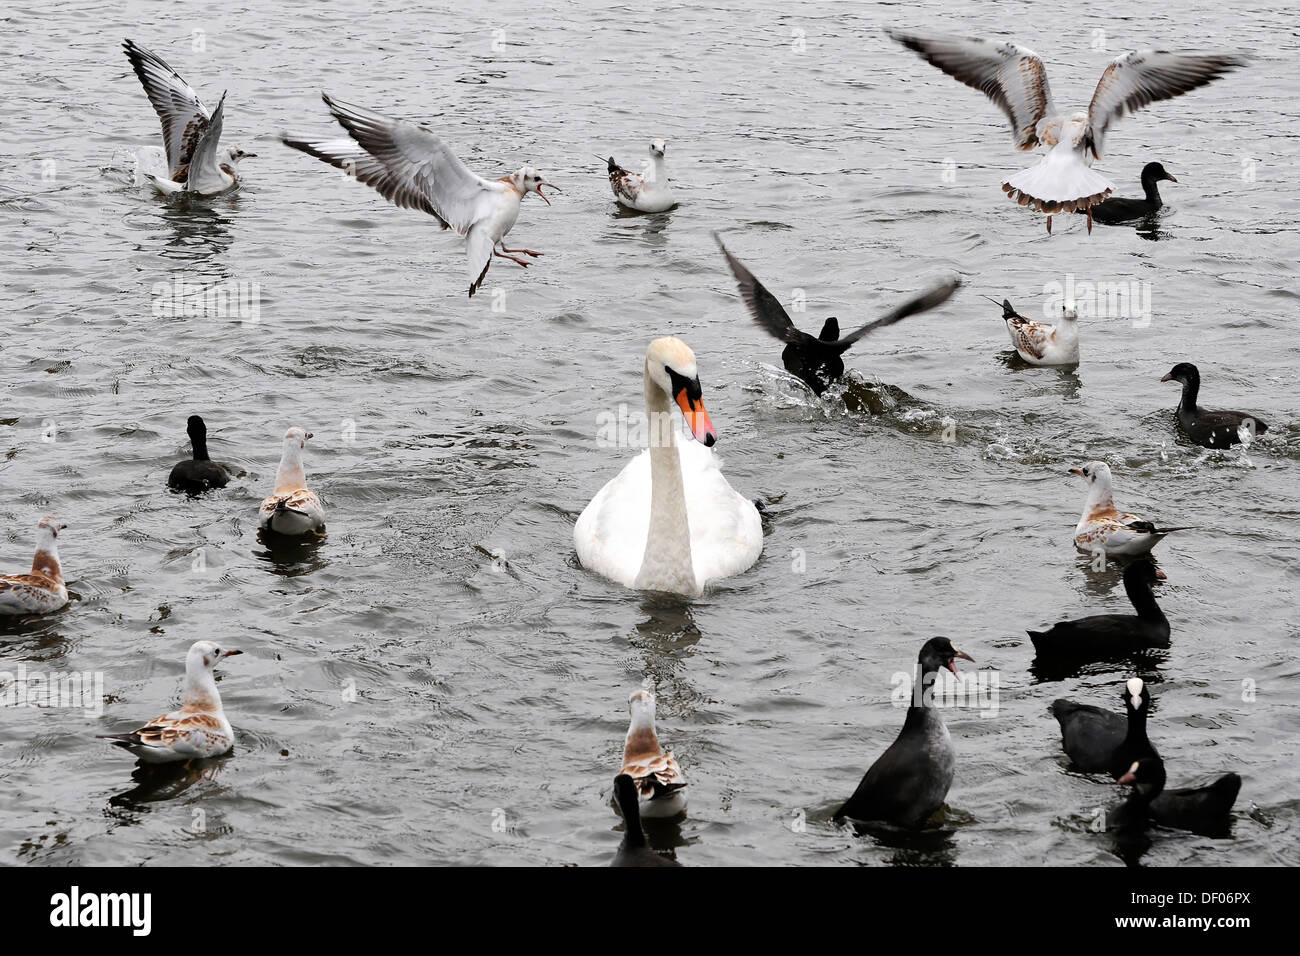 Birds, waterfowls waiting for food, Alster River, Hanseatic City of Hamburg Stock Photo